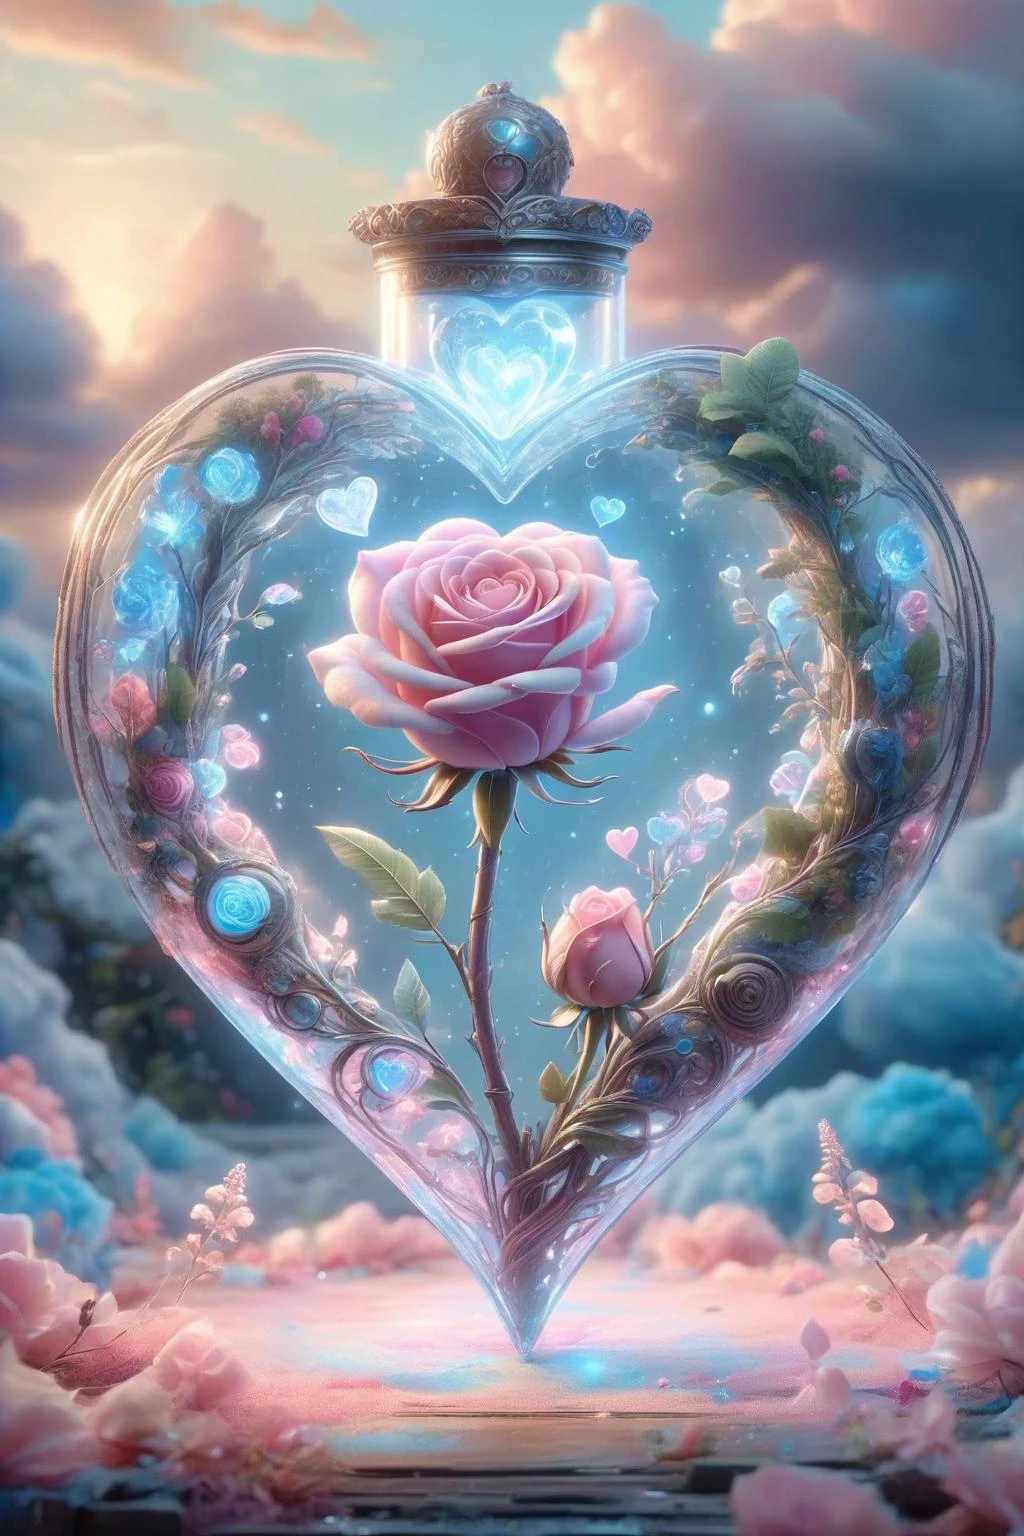 Digital Art,Concept Art,octane rendering,unreal engine,dreamlike scenes,delicate and rich light and color,superb light and shadow effects and color matching,aesthetic and romantic,Surrealistic,magical,fantasist,fantastic,Ornate And Intricate,unimaginable beauty,
A glowing [pink|purple] rose and some glowing blue plants in a transparent (heart-shaped:1.5) glass container,
this container in a love story book,extremely romantic mood,nostalgic atmosphere,gentle light and lingering composition,depth of field,letitflrsh,cottoncandy,